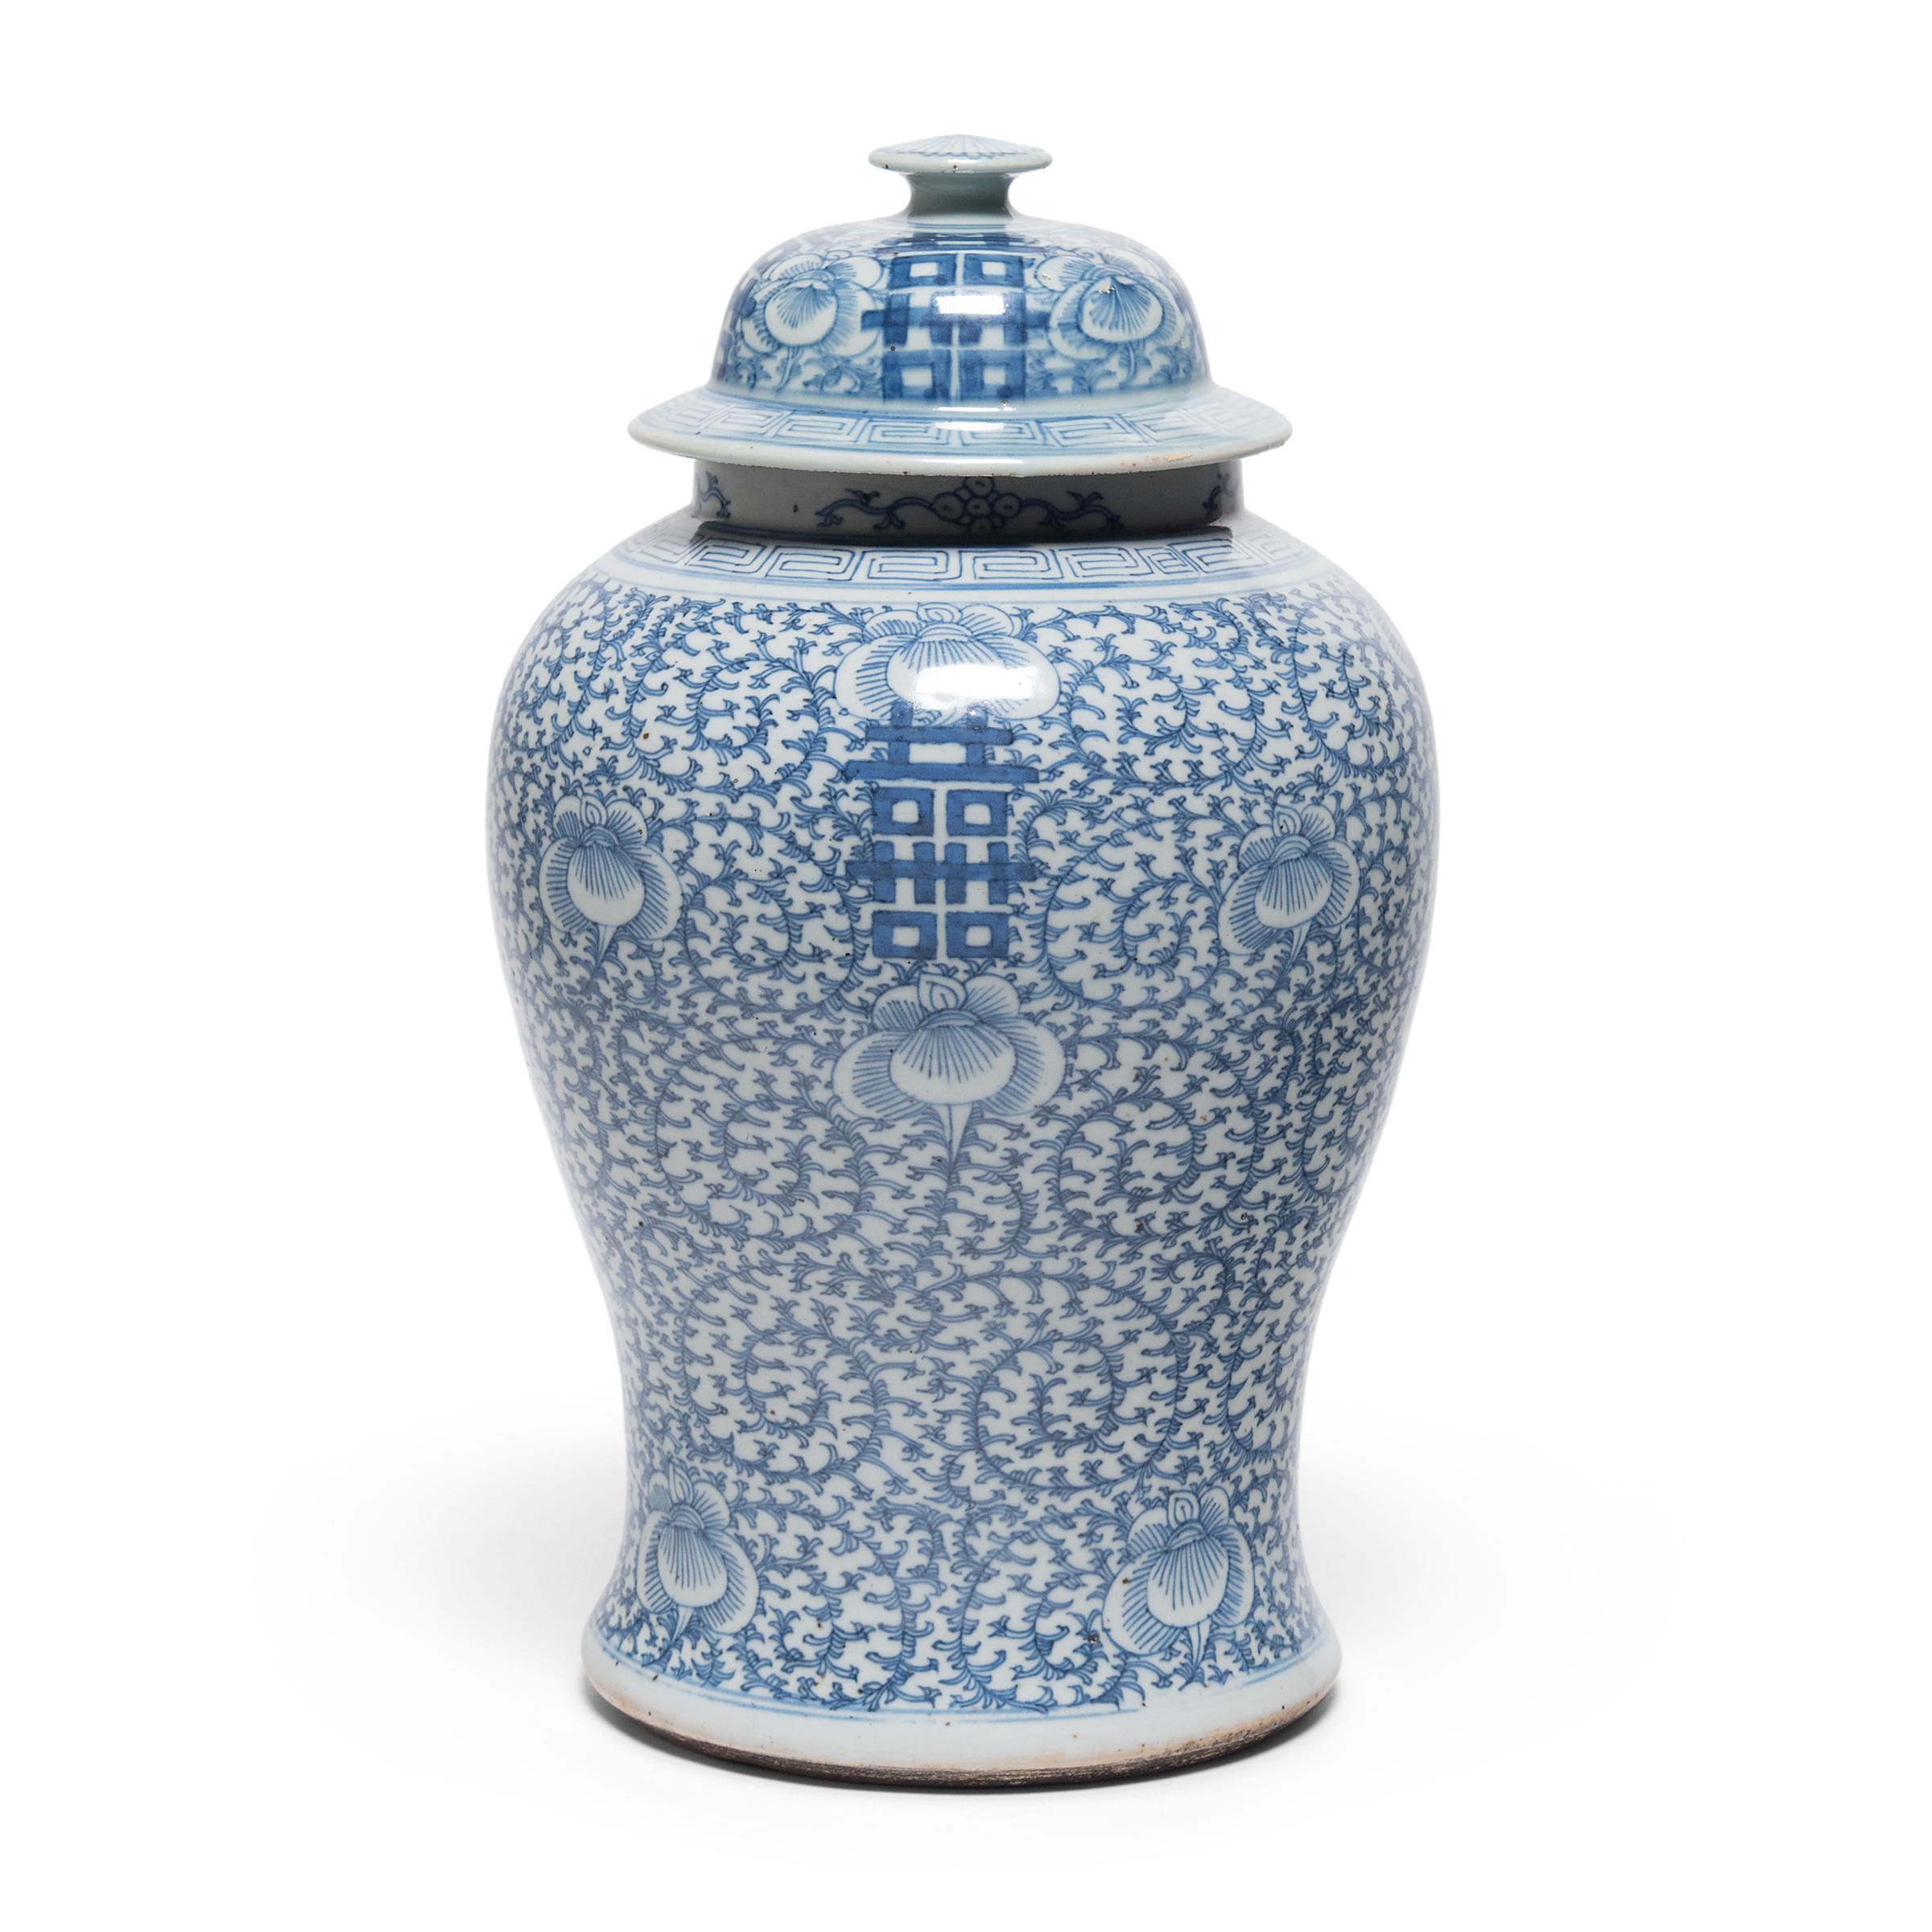 Chinese Export Chinese Blue and White Double Happiness Ginger Jar, circa 1850